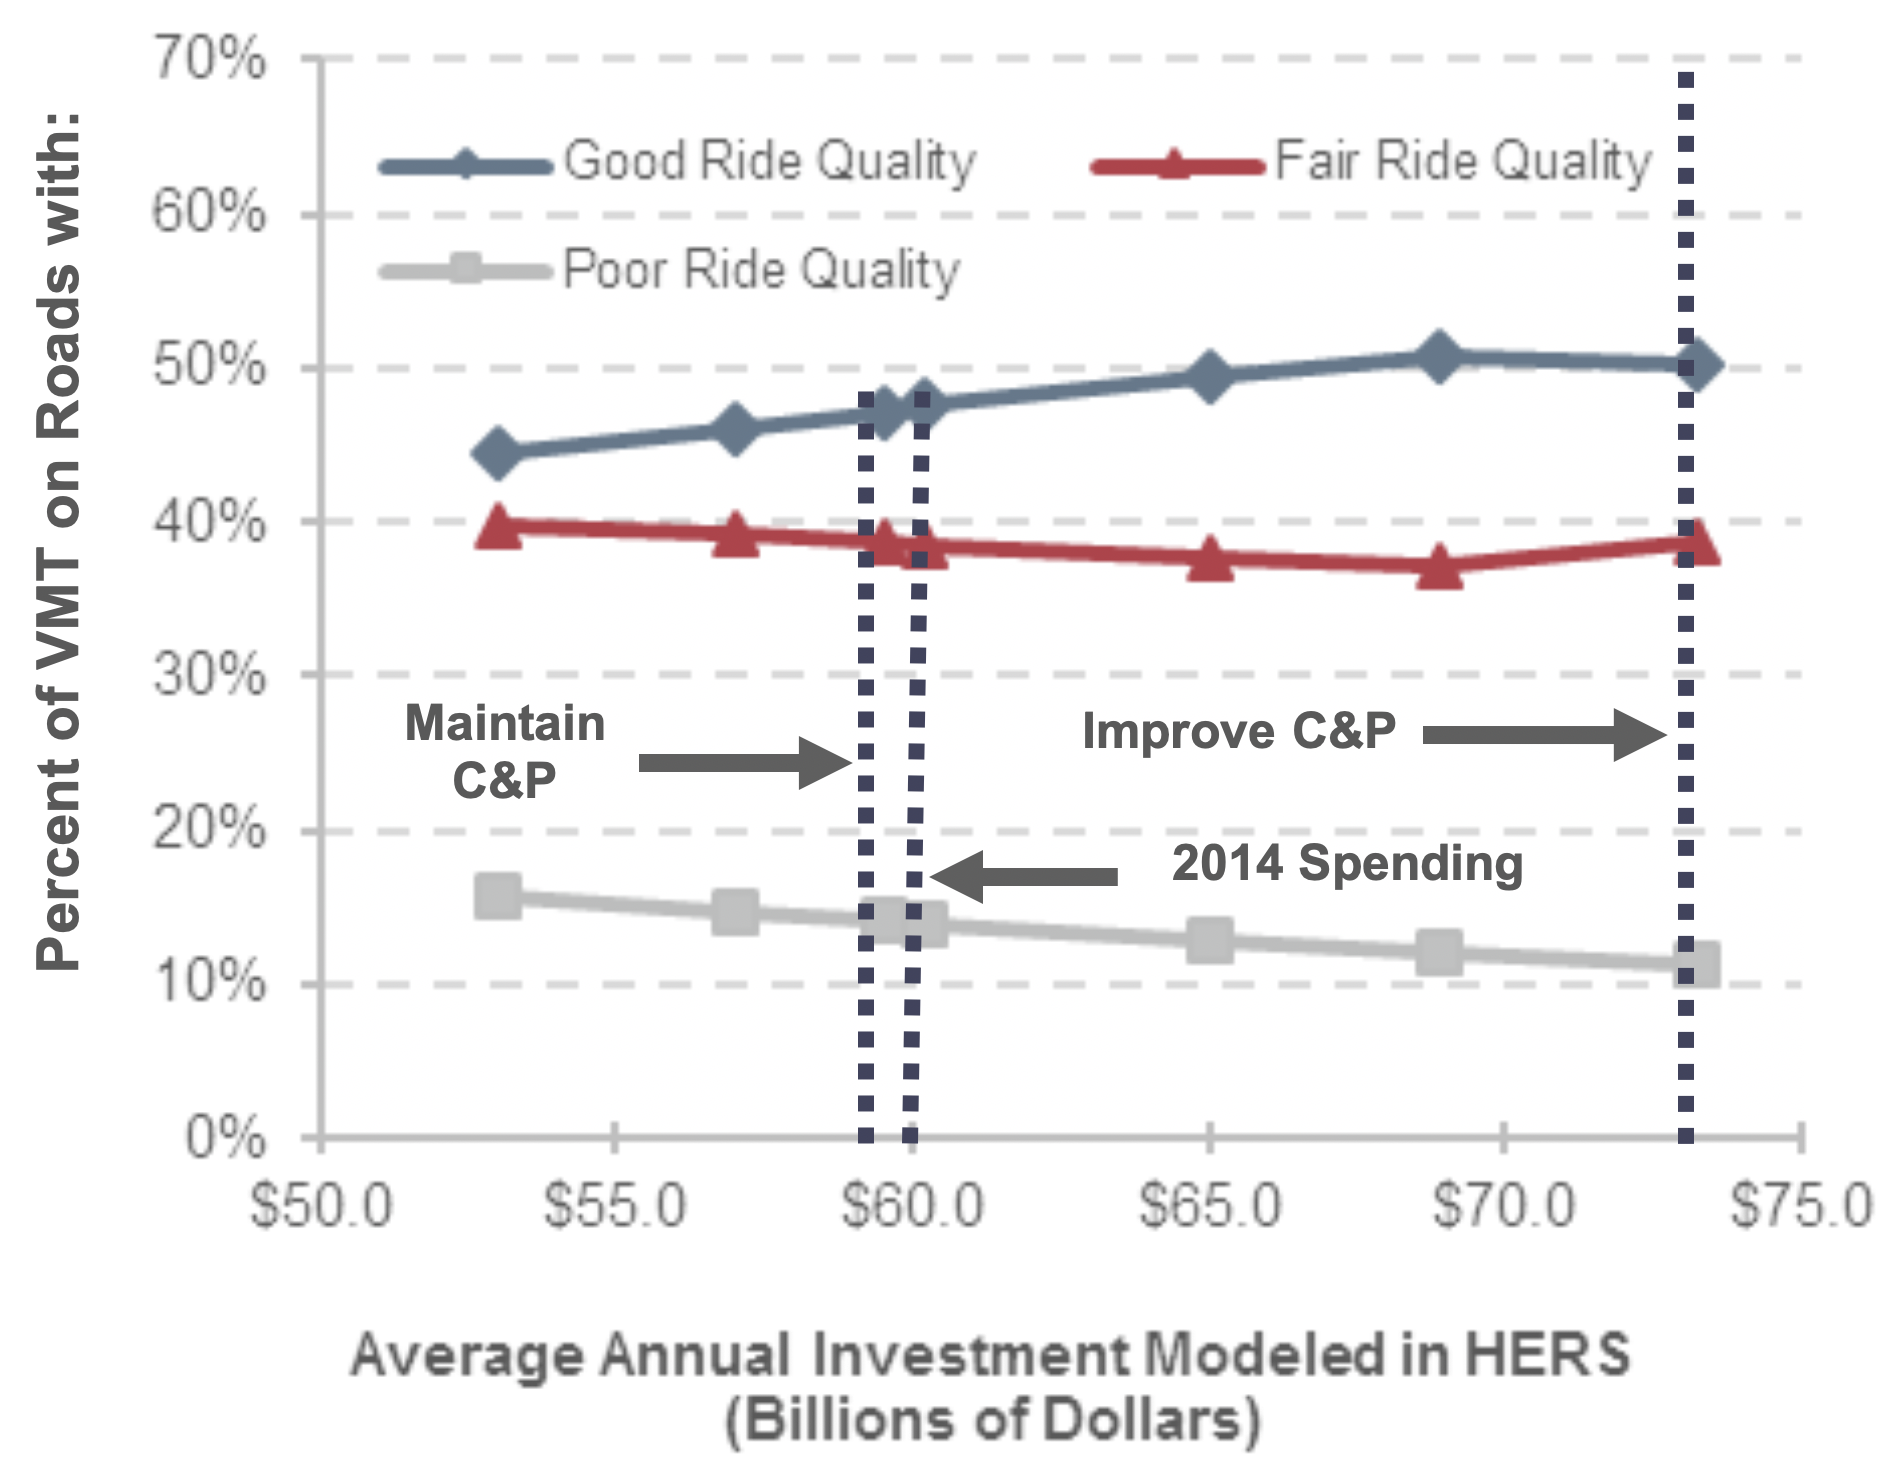 A line graph plots the percentage of VMT on roads of various ride quality according to the average annual investment modeled in HERS, in billions of 2014 dollars. The values corresponding to the HERS inputs to three different scenarios—Maintain C&P ($58.5 billion), 2014 Spending (60.2 billion), and Improve C&P ($68.9 billion)—are highlighted via vertical lines. Roads with good ride quality start at 44.4 percent with $53.0 billion in investment and increase as investment increases, except for a slight decrease at the upper end of investment to a final value of 50.7 percent with investment of $68.9 billion. Roads with fair ride quality start at 39.8 percent with investment of $53.0 billion, and decrease as investment increases, except for a slight increase at the upper end of investment to a value of 37.2 percent at $68.9 billion. Roads with poor ride quality start at 15.8 percent with $53.0 billion in investment and decrease as investment increases to a final value of 12.1 percent at $68.9 billion of investment. Source: Highway Economic Requirements System.